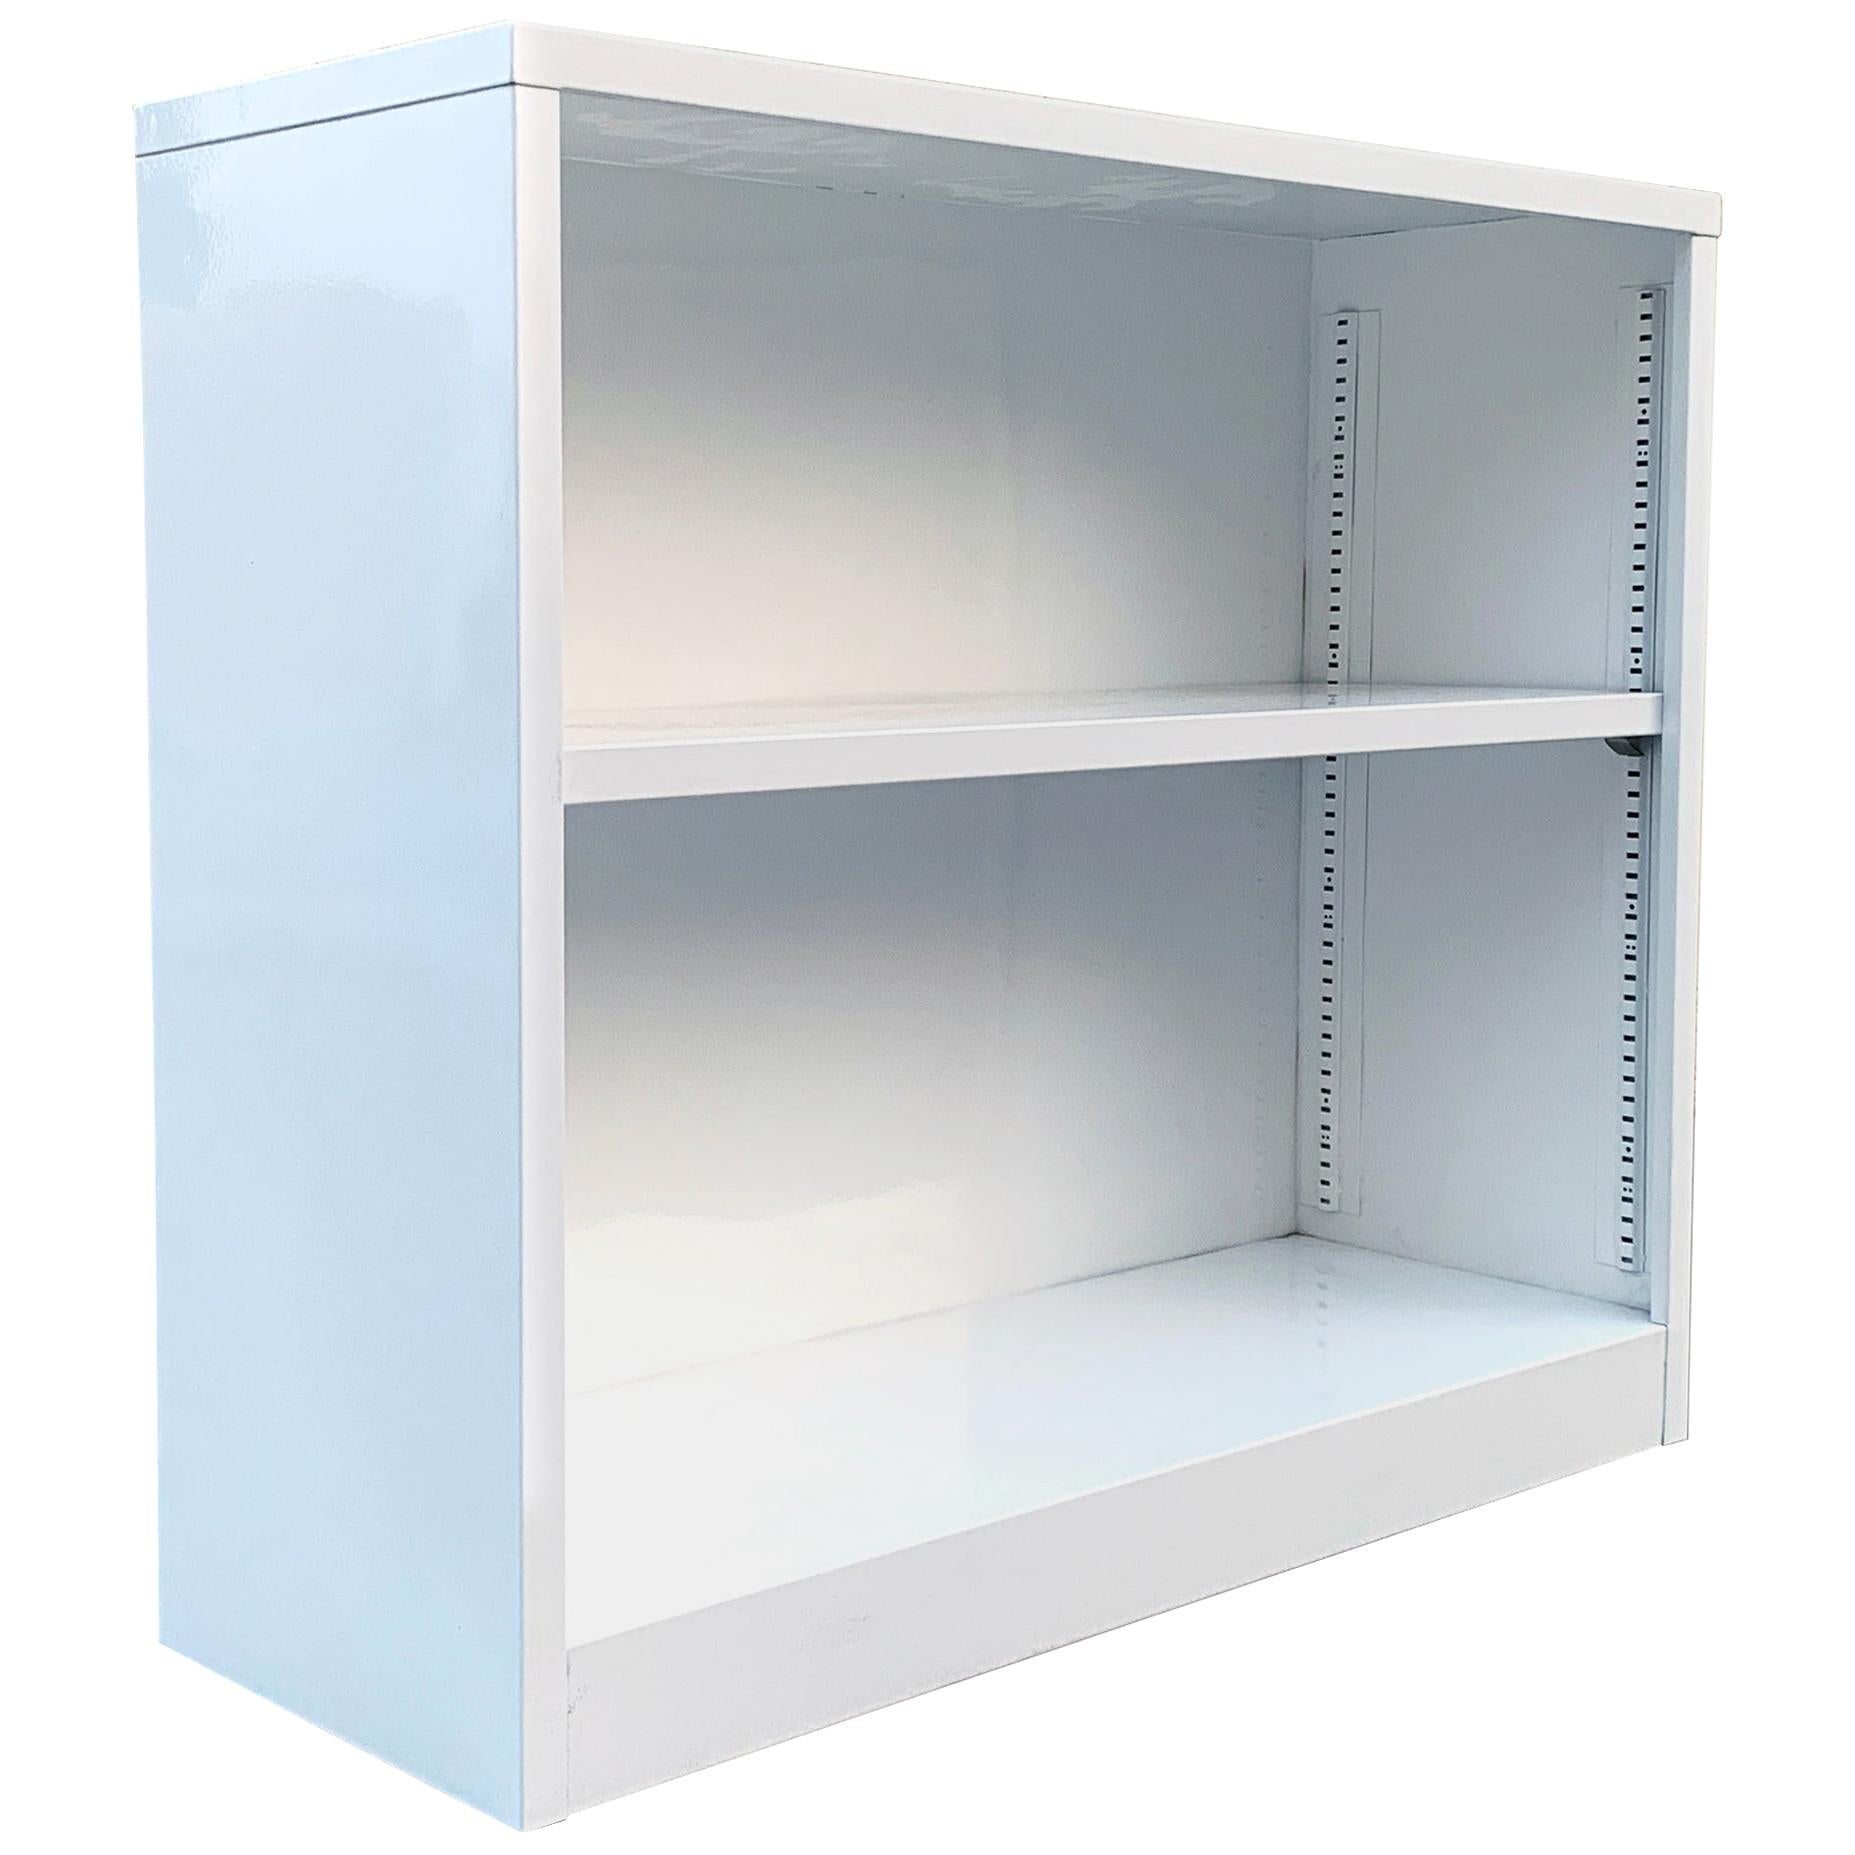 Midcentury Steel Tanker Home-Office Bookcase in Gloss White, Custom Refinished For Sale